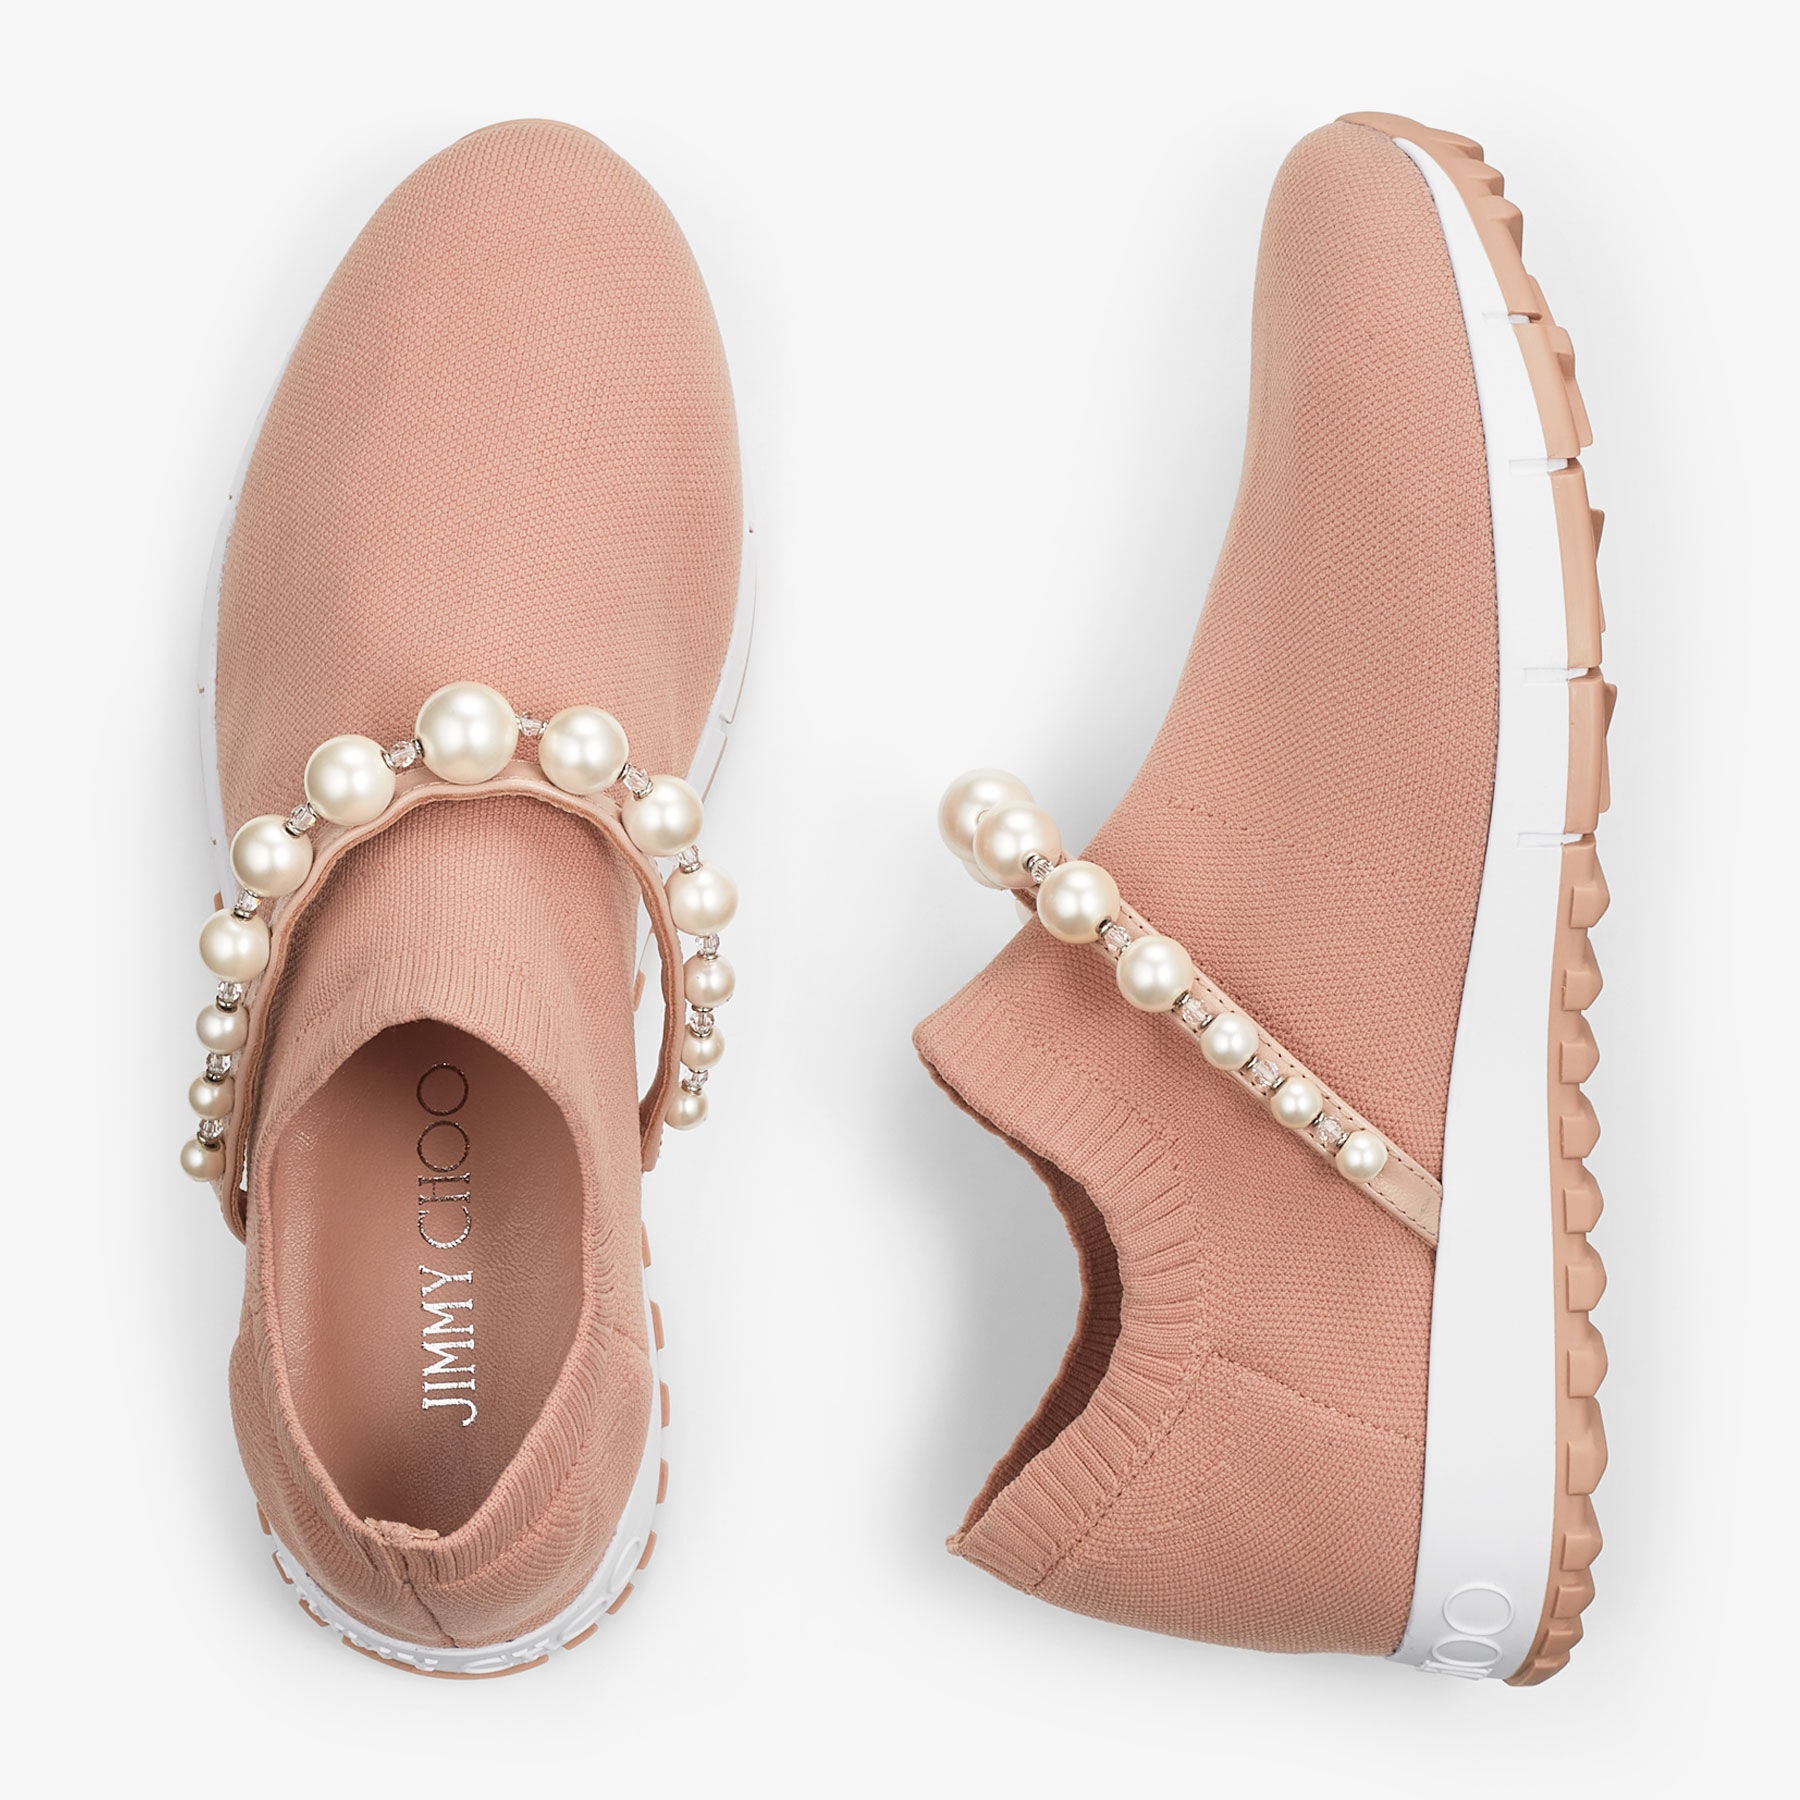 Venice
Ballet Pink Knit Trainers with Pearls - 6